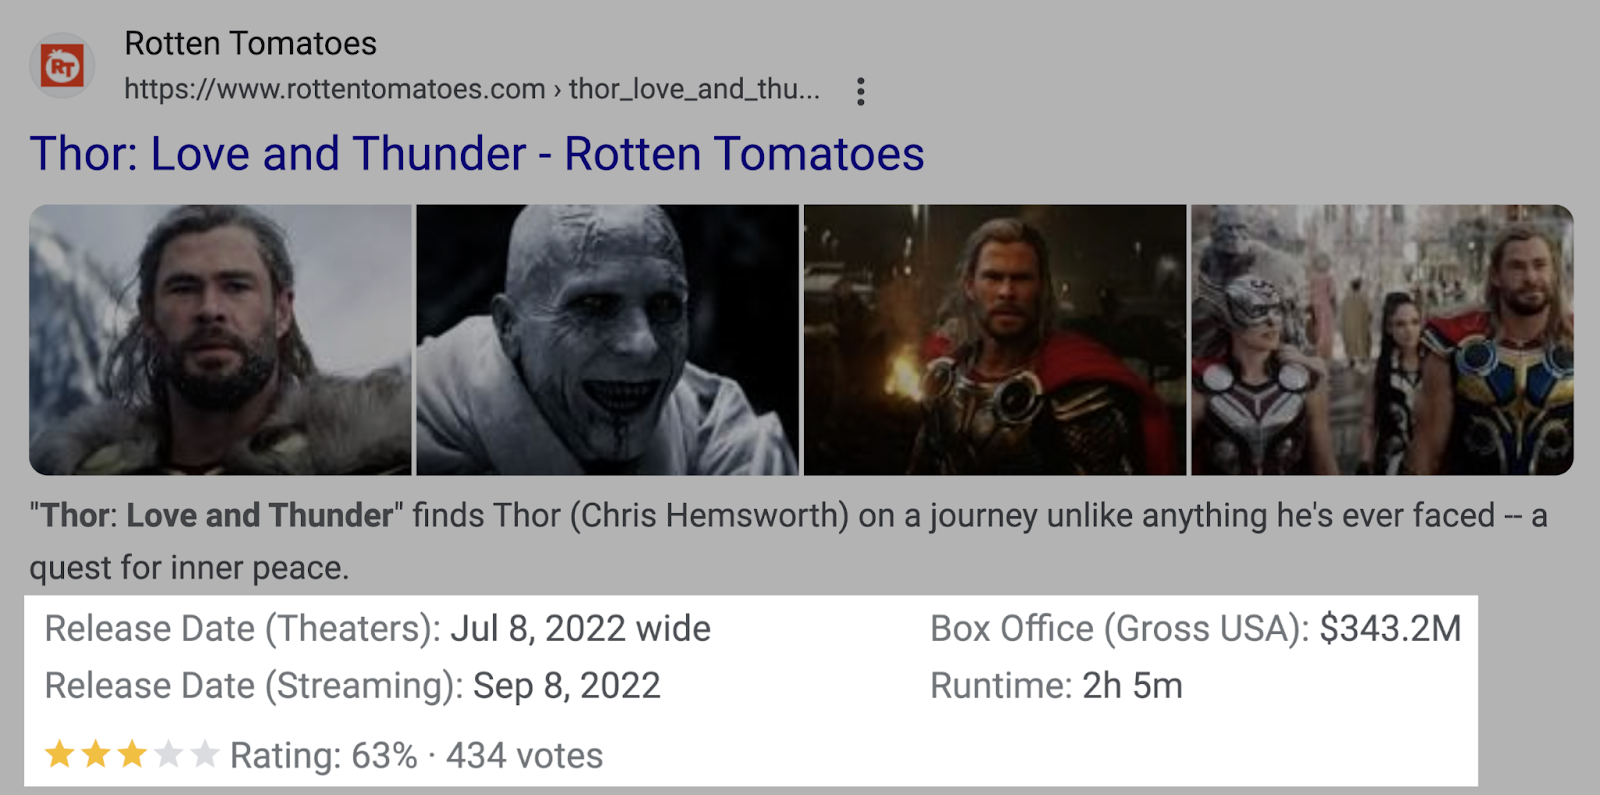 an example of a movie snippet for Thor movie on Rotten Tomatoes